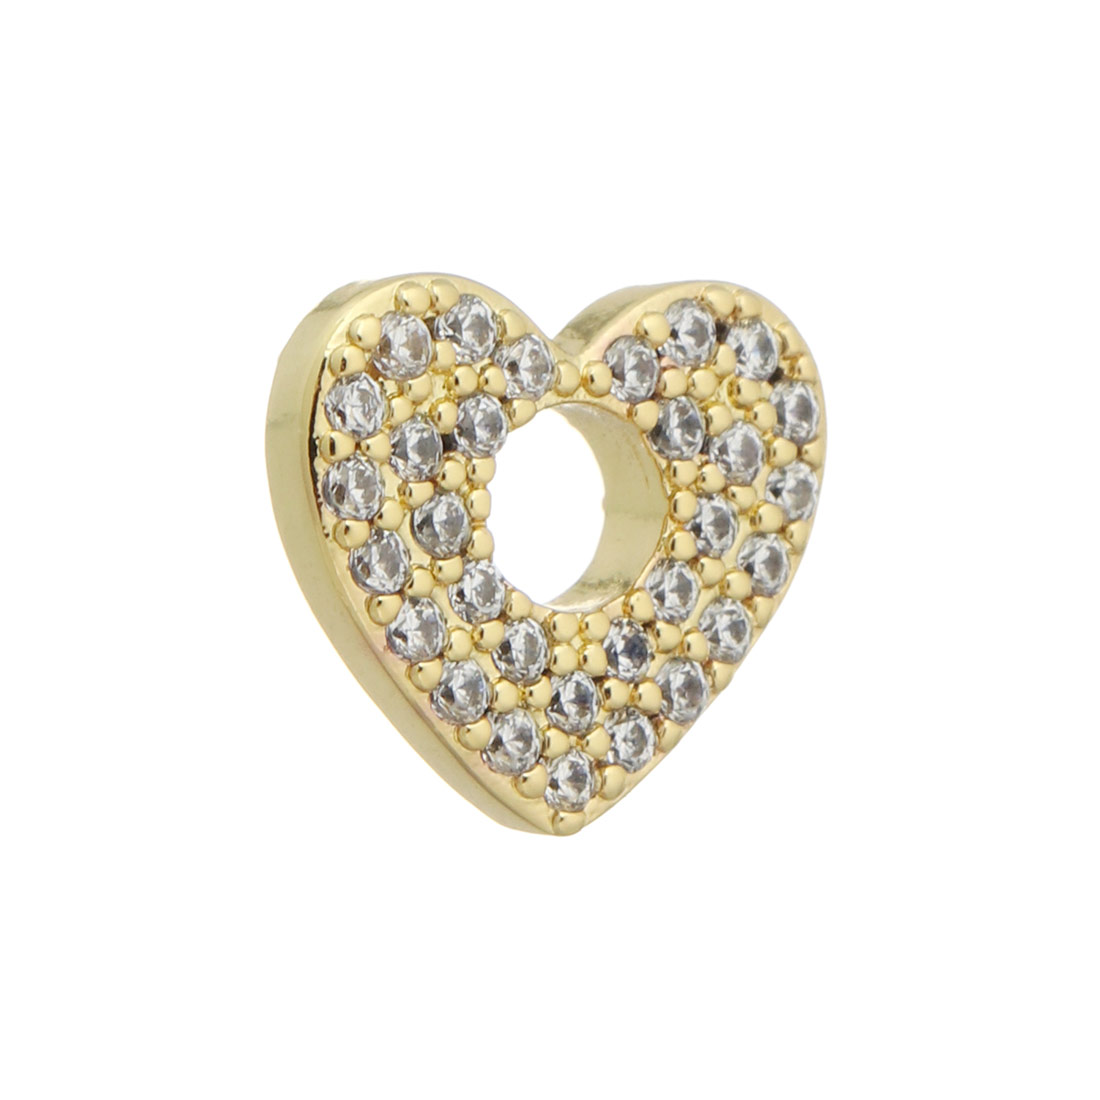 8:gold color with crystal cubic zirconia